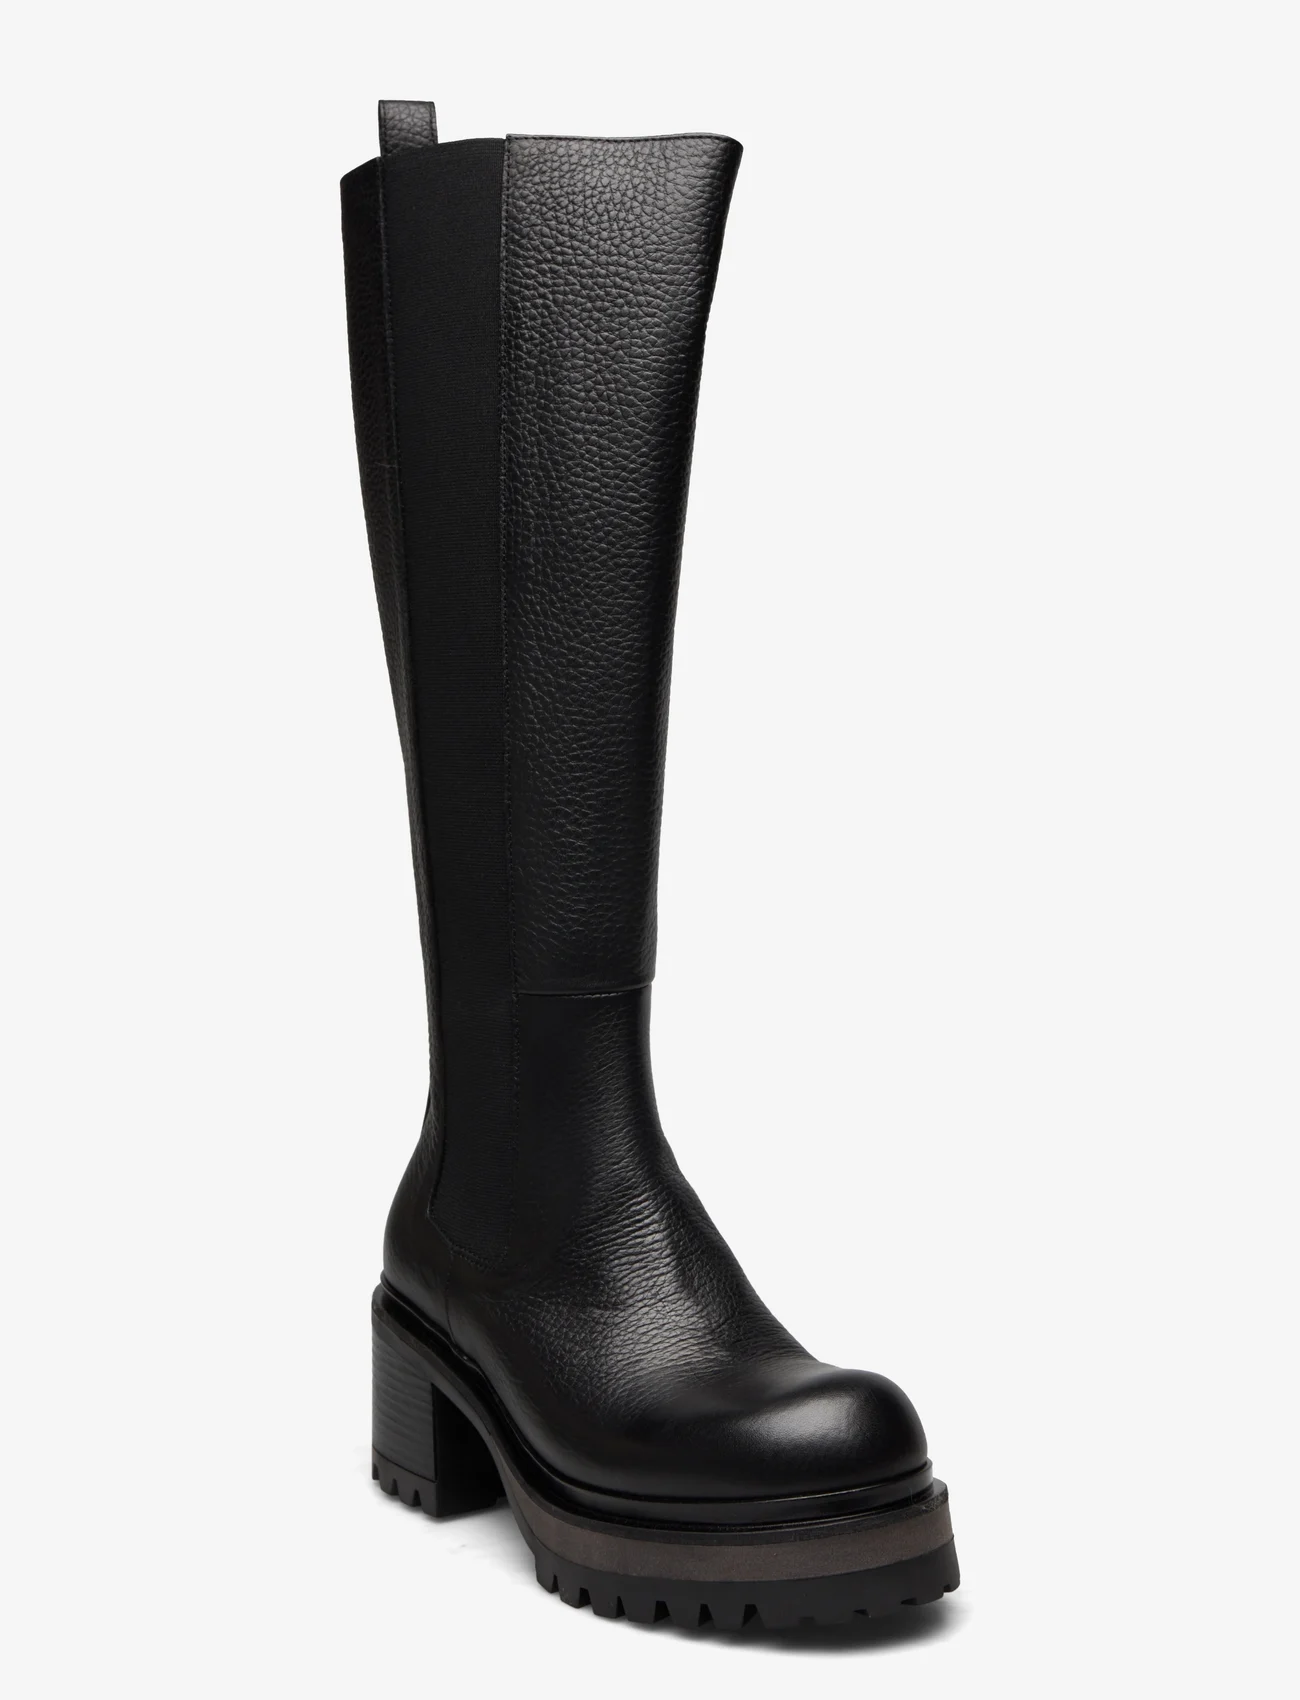 Laura Bellariva - ANKLE BOOTS - knee high boots - black - 0